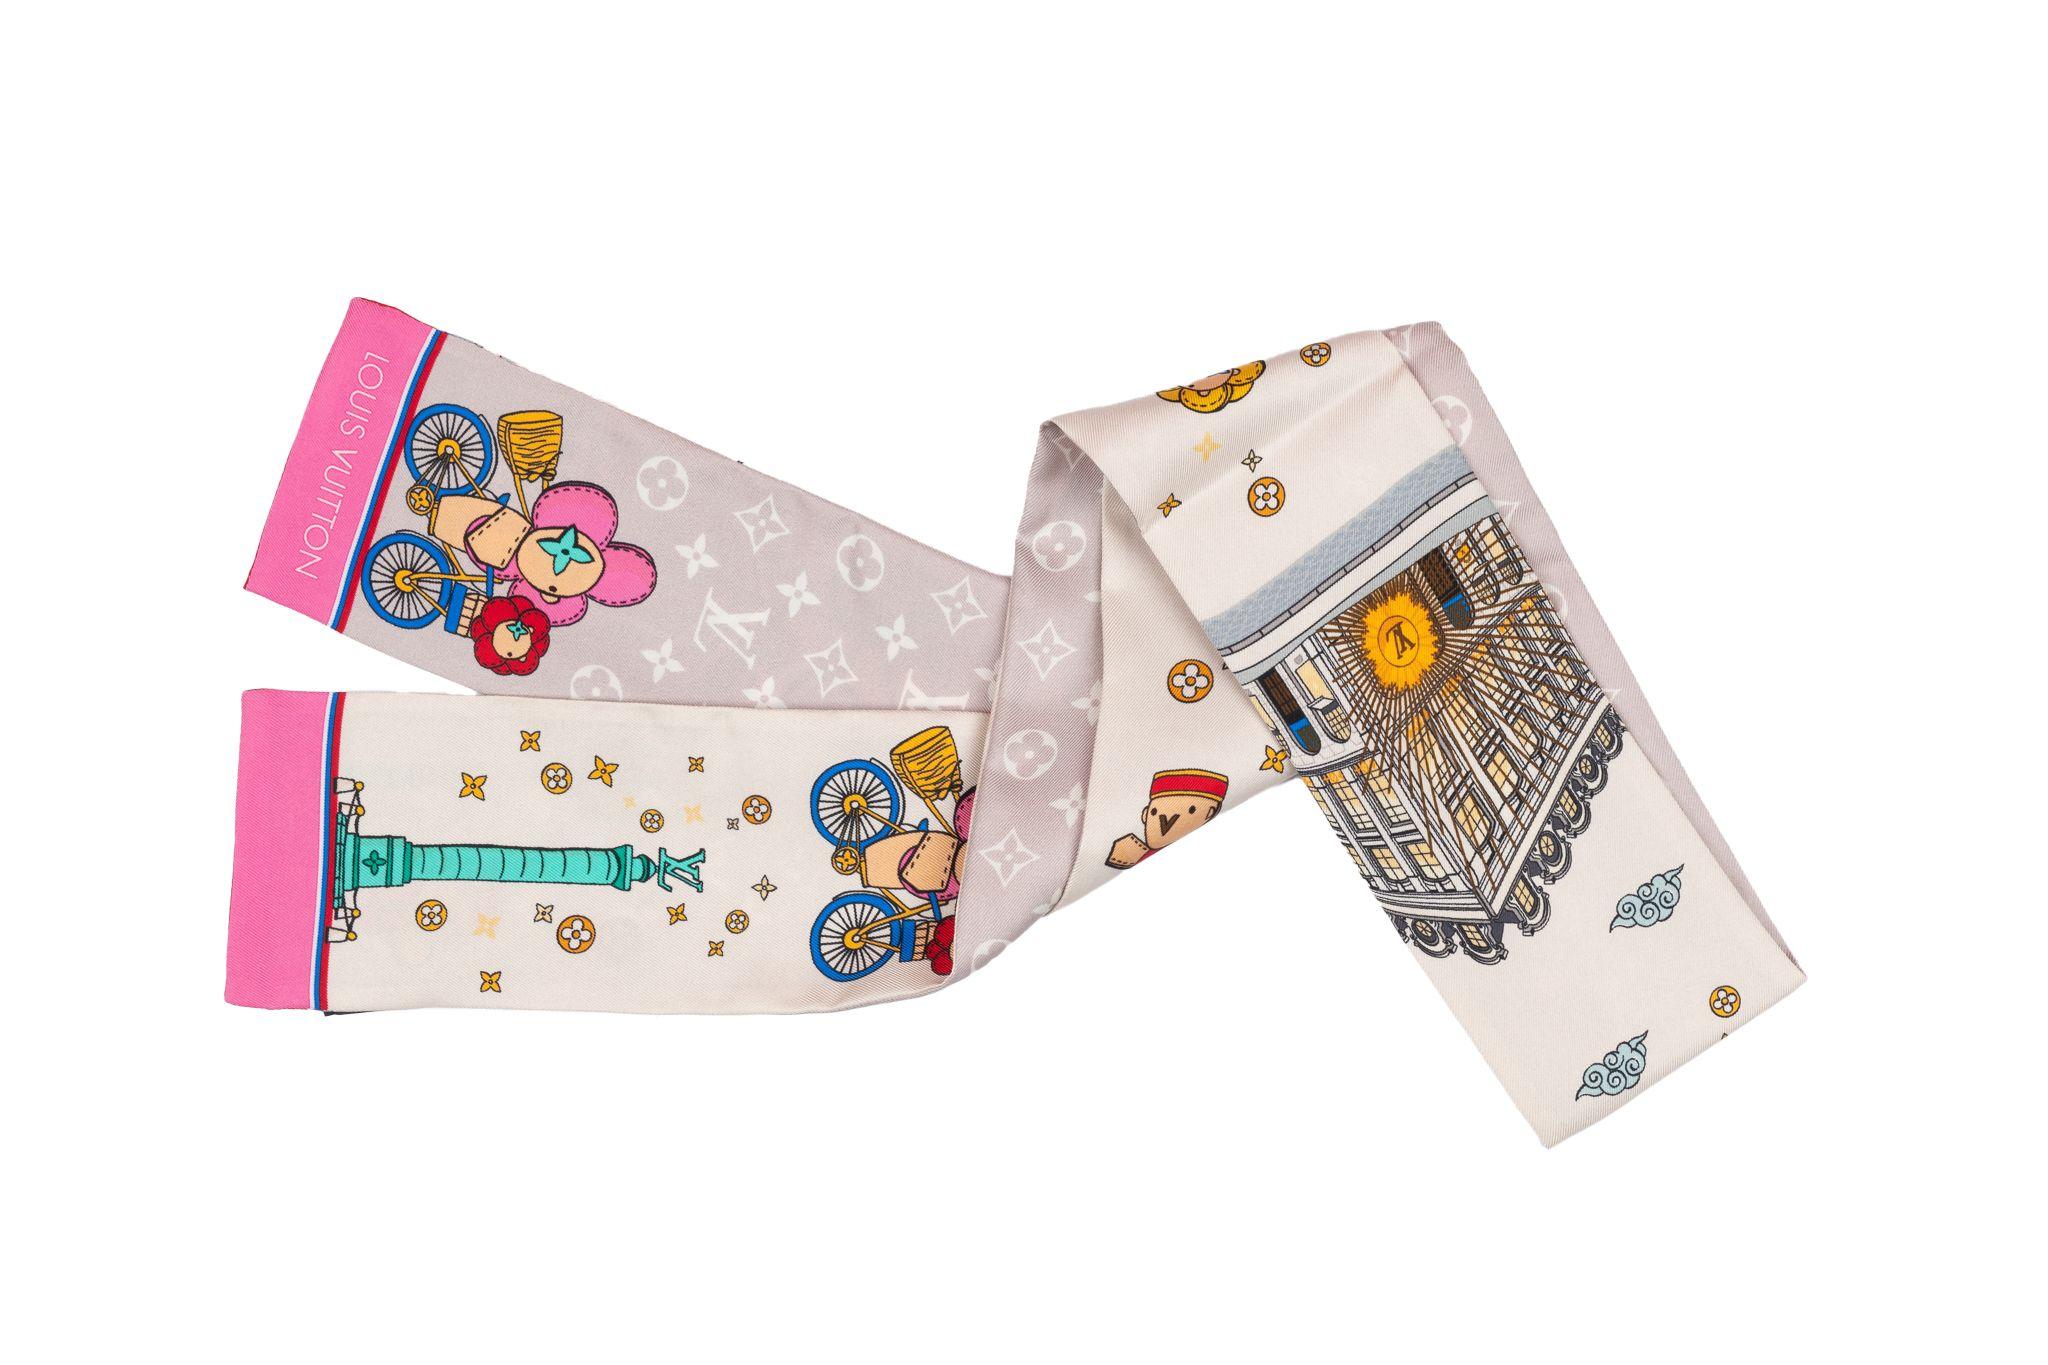 Louis Vuitton Bandeau Vivienne Paris depicts the Maison's popular mascot cycling through the streets of Paris towards the iconic Place Vendôme and Louis Vuitton store. The scarf is new and comes with the original box.